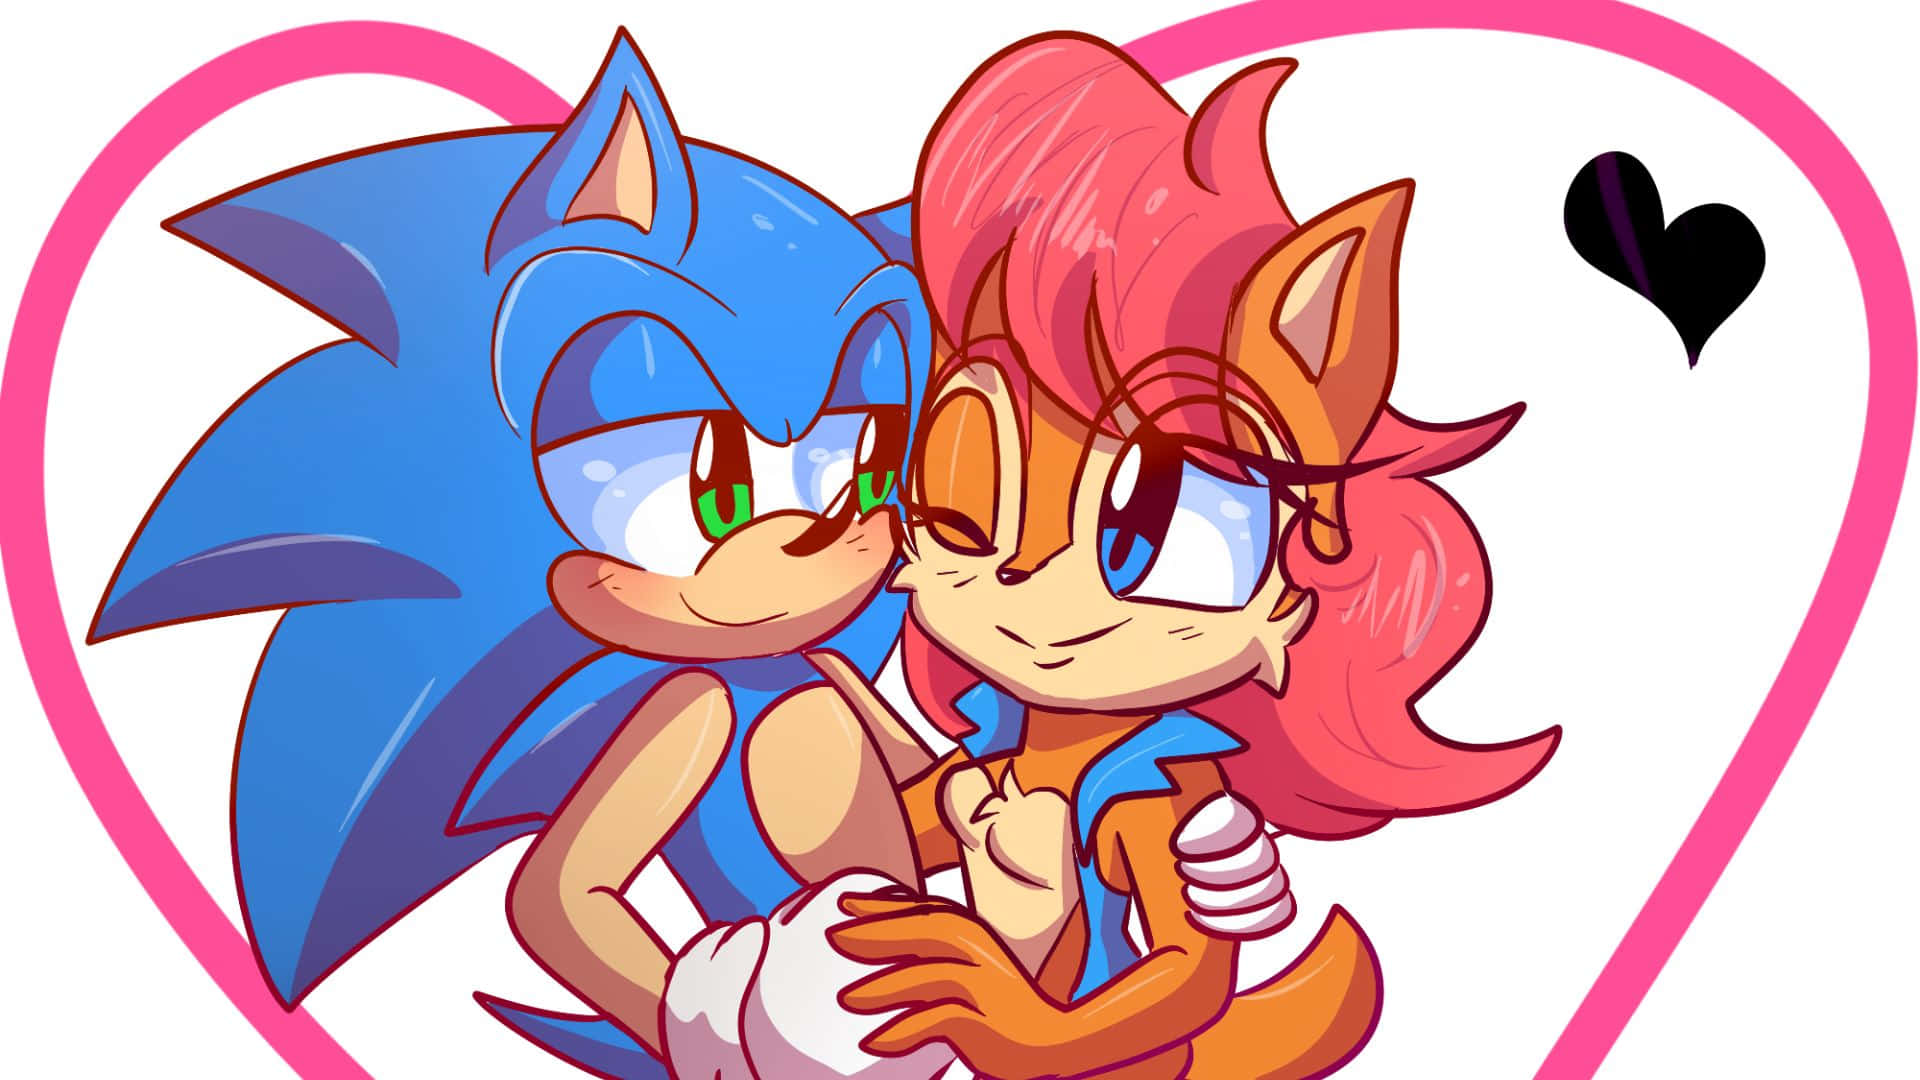 Sonic and Sally sharing a sweet moment together Wallpaper